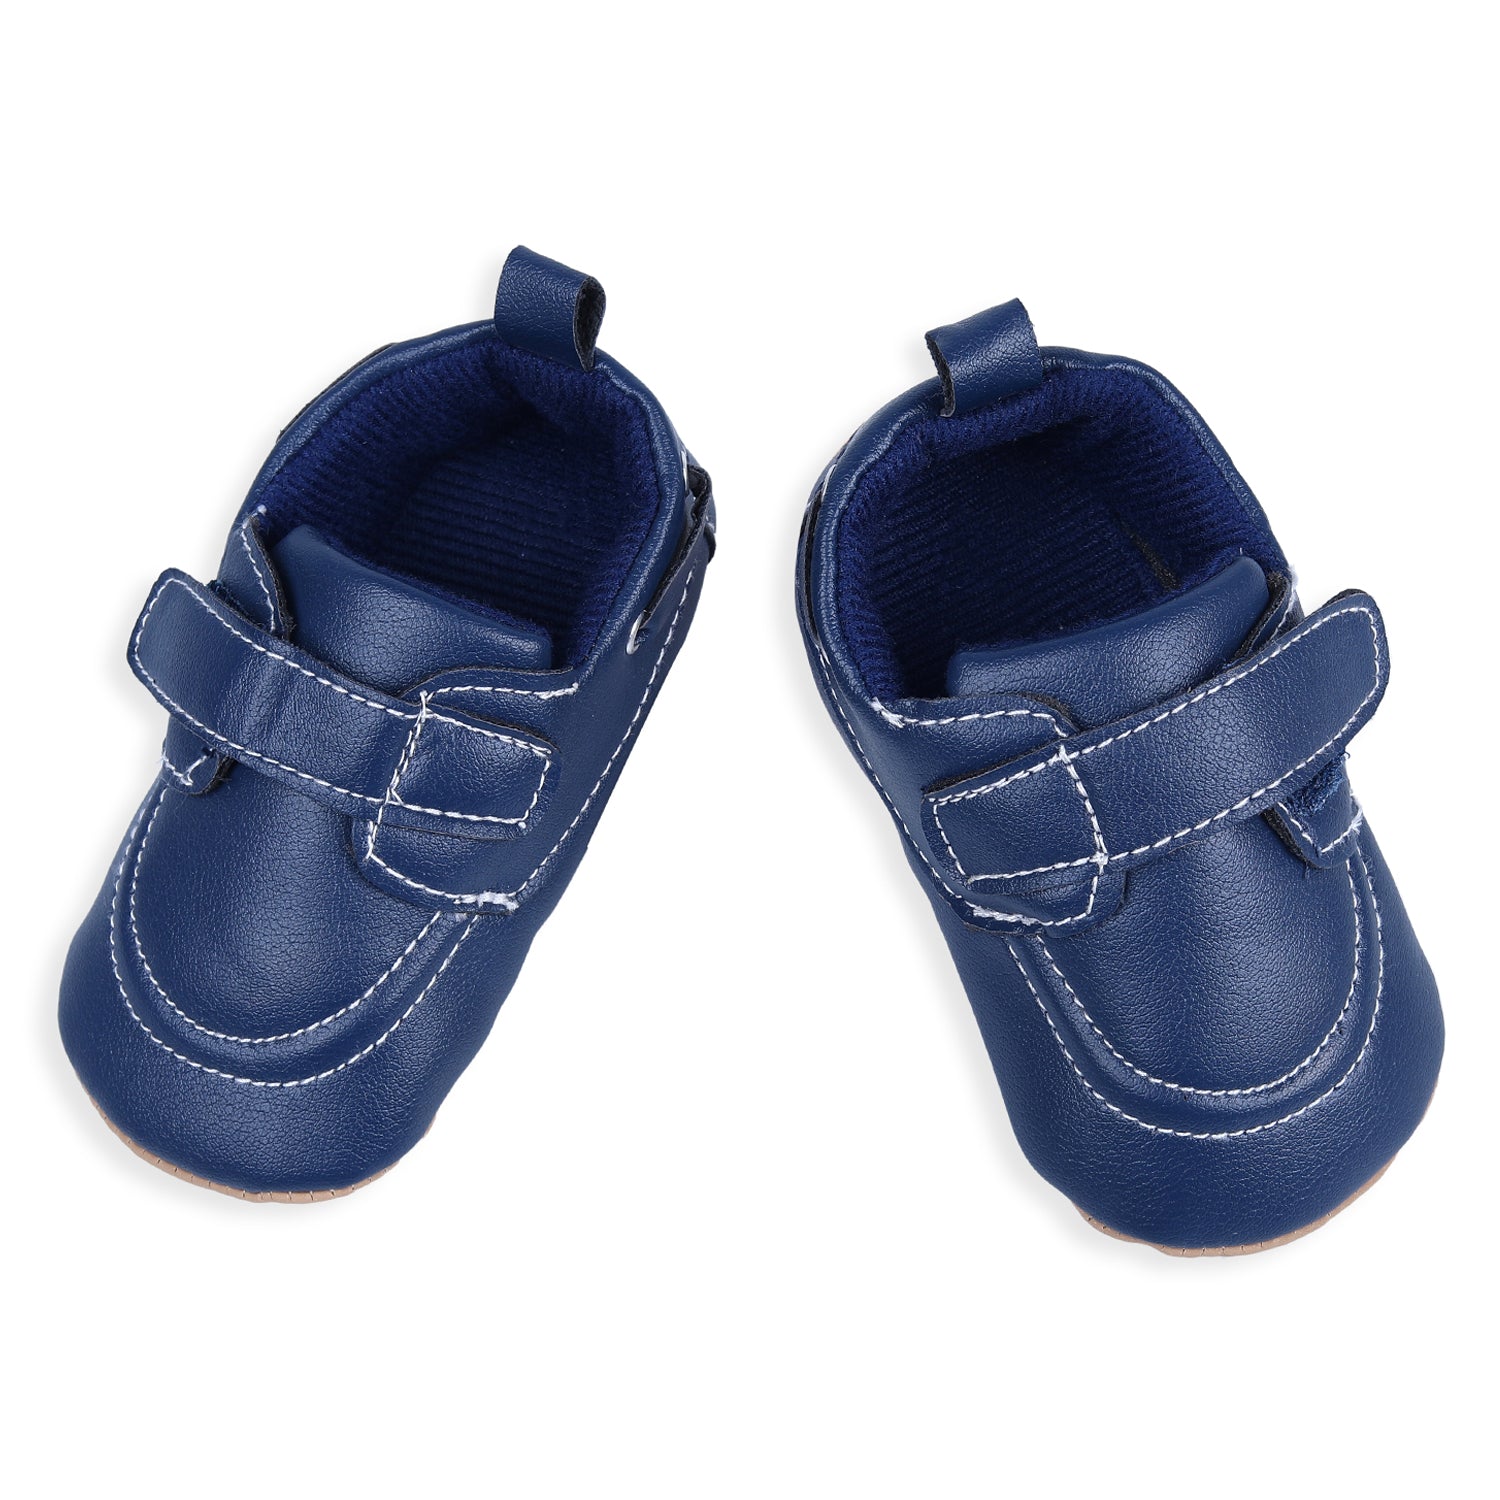 Baby Moo Solid Hookloop Stylish Leather Velcro Shoes - Navy Blue